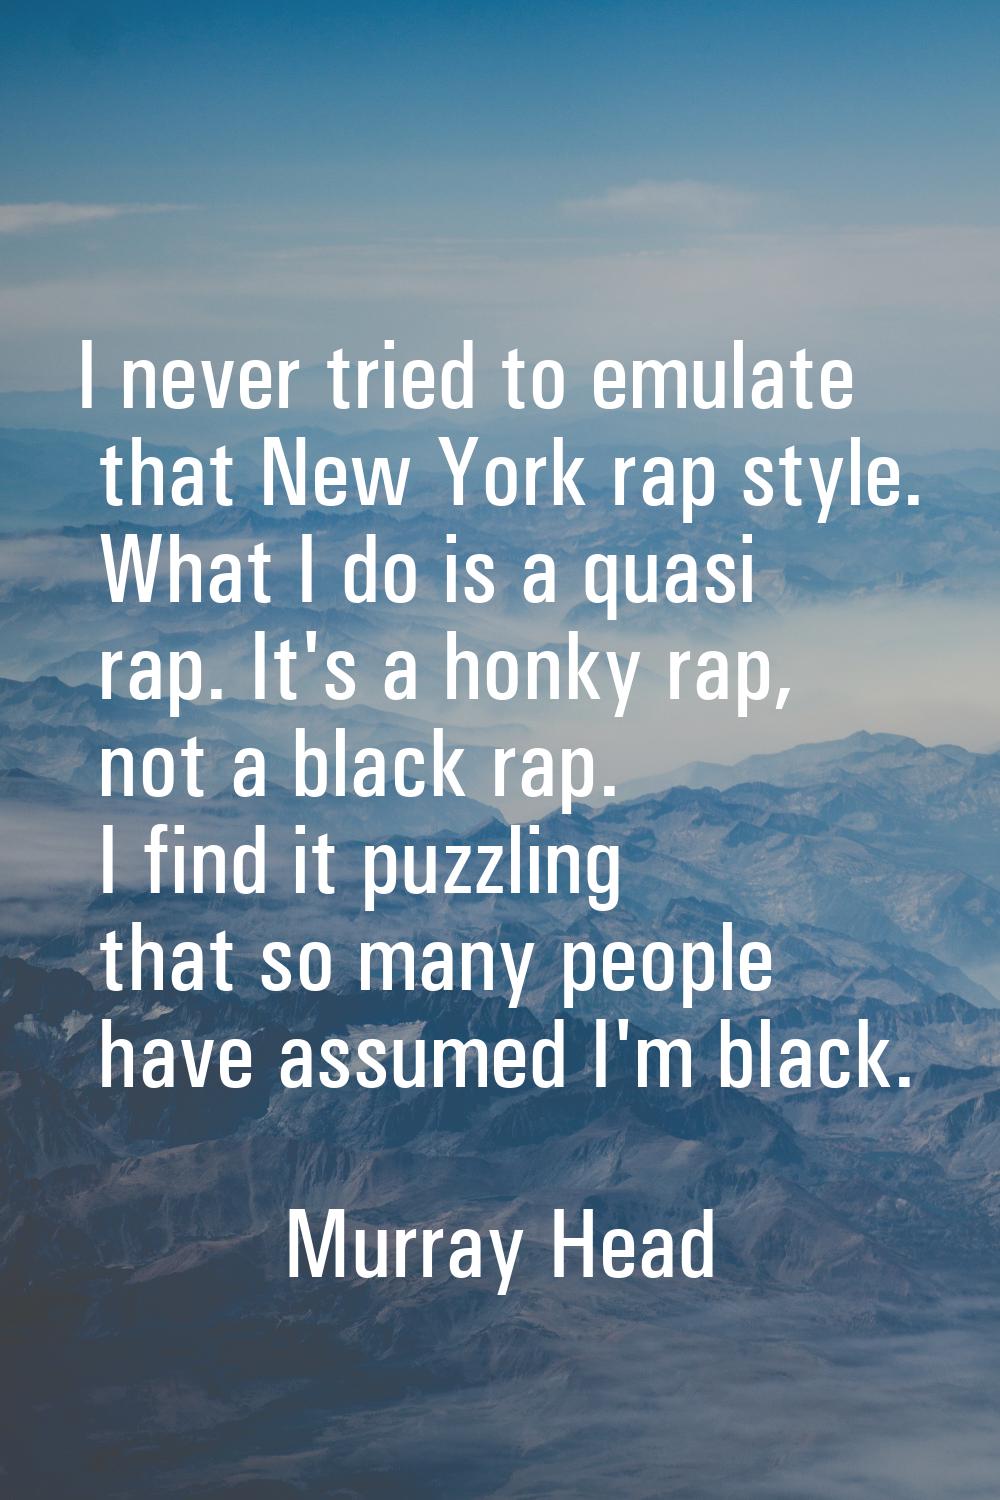 I never tried to emulate that New York rap style. What I do is a quasi rap. It's a honky rap, not a